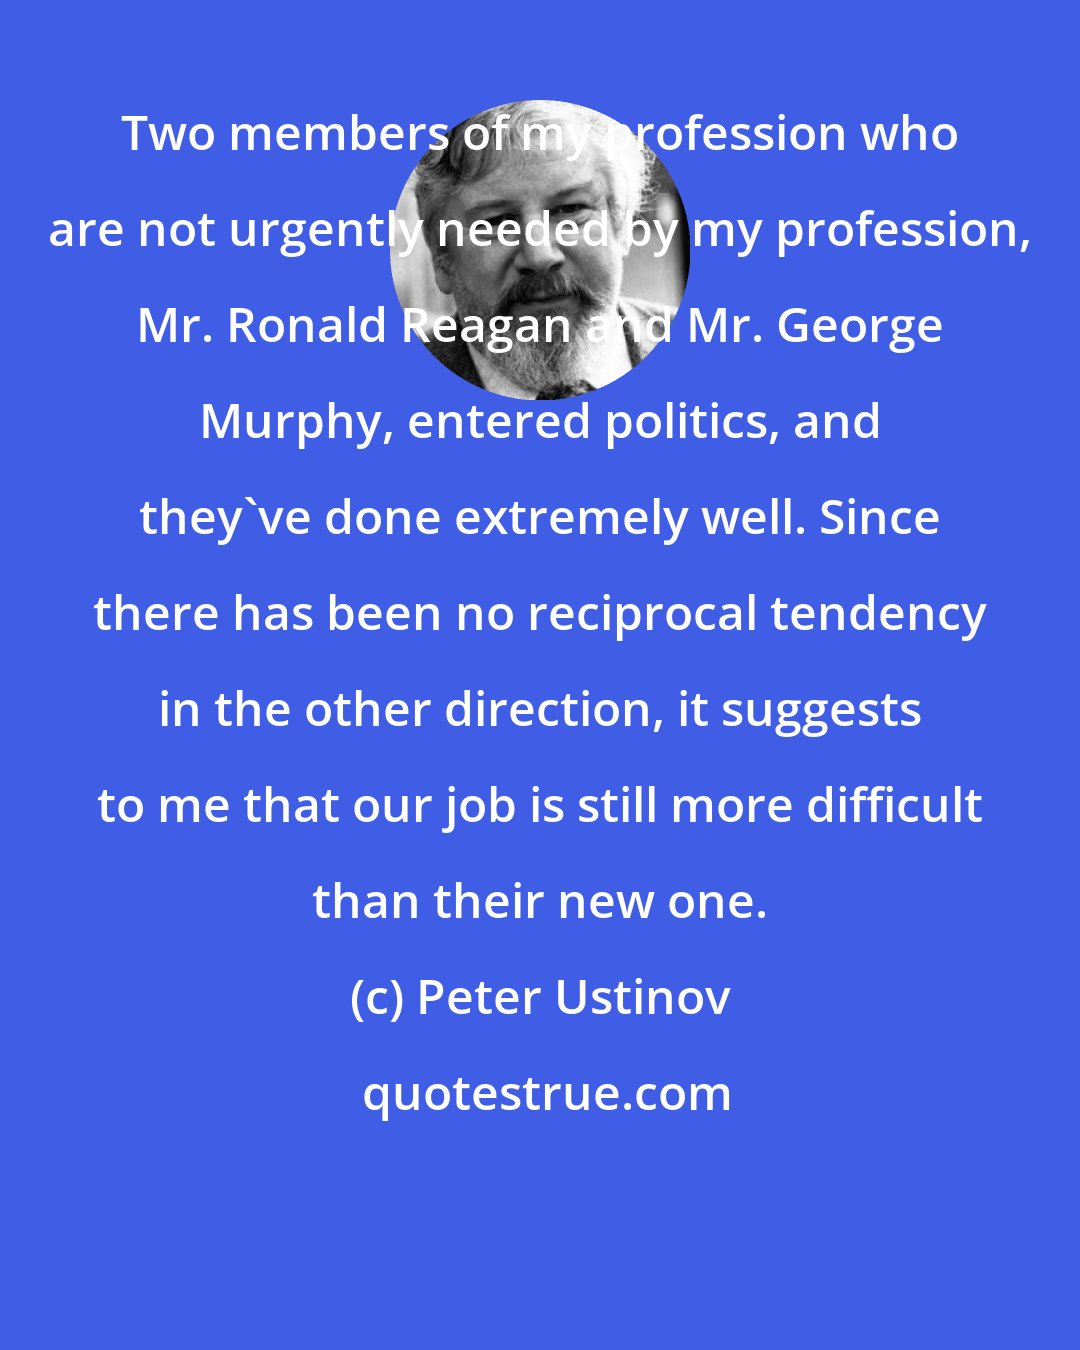 Peter Ustinov: Two members of my profession who are not urgently needed by my profession, Mr. Ronald Reagan and Mr. George Murphy, entered politics, and they've done extremely well. Since there has been no reciprocal tendency in the other direction, it suggests to me that our job is still more difficult than their new one.